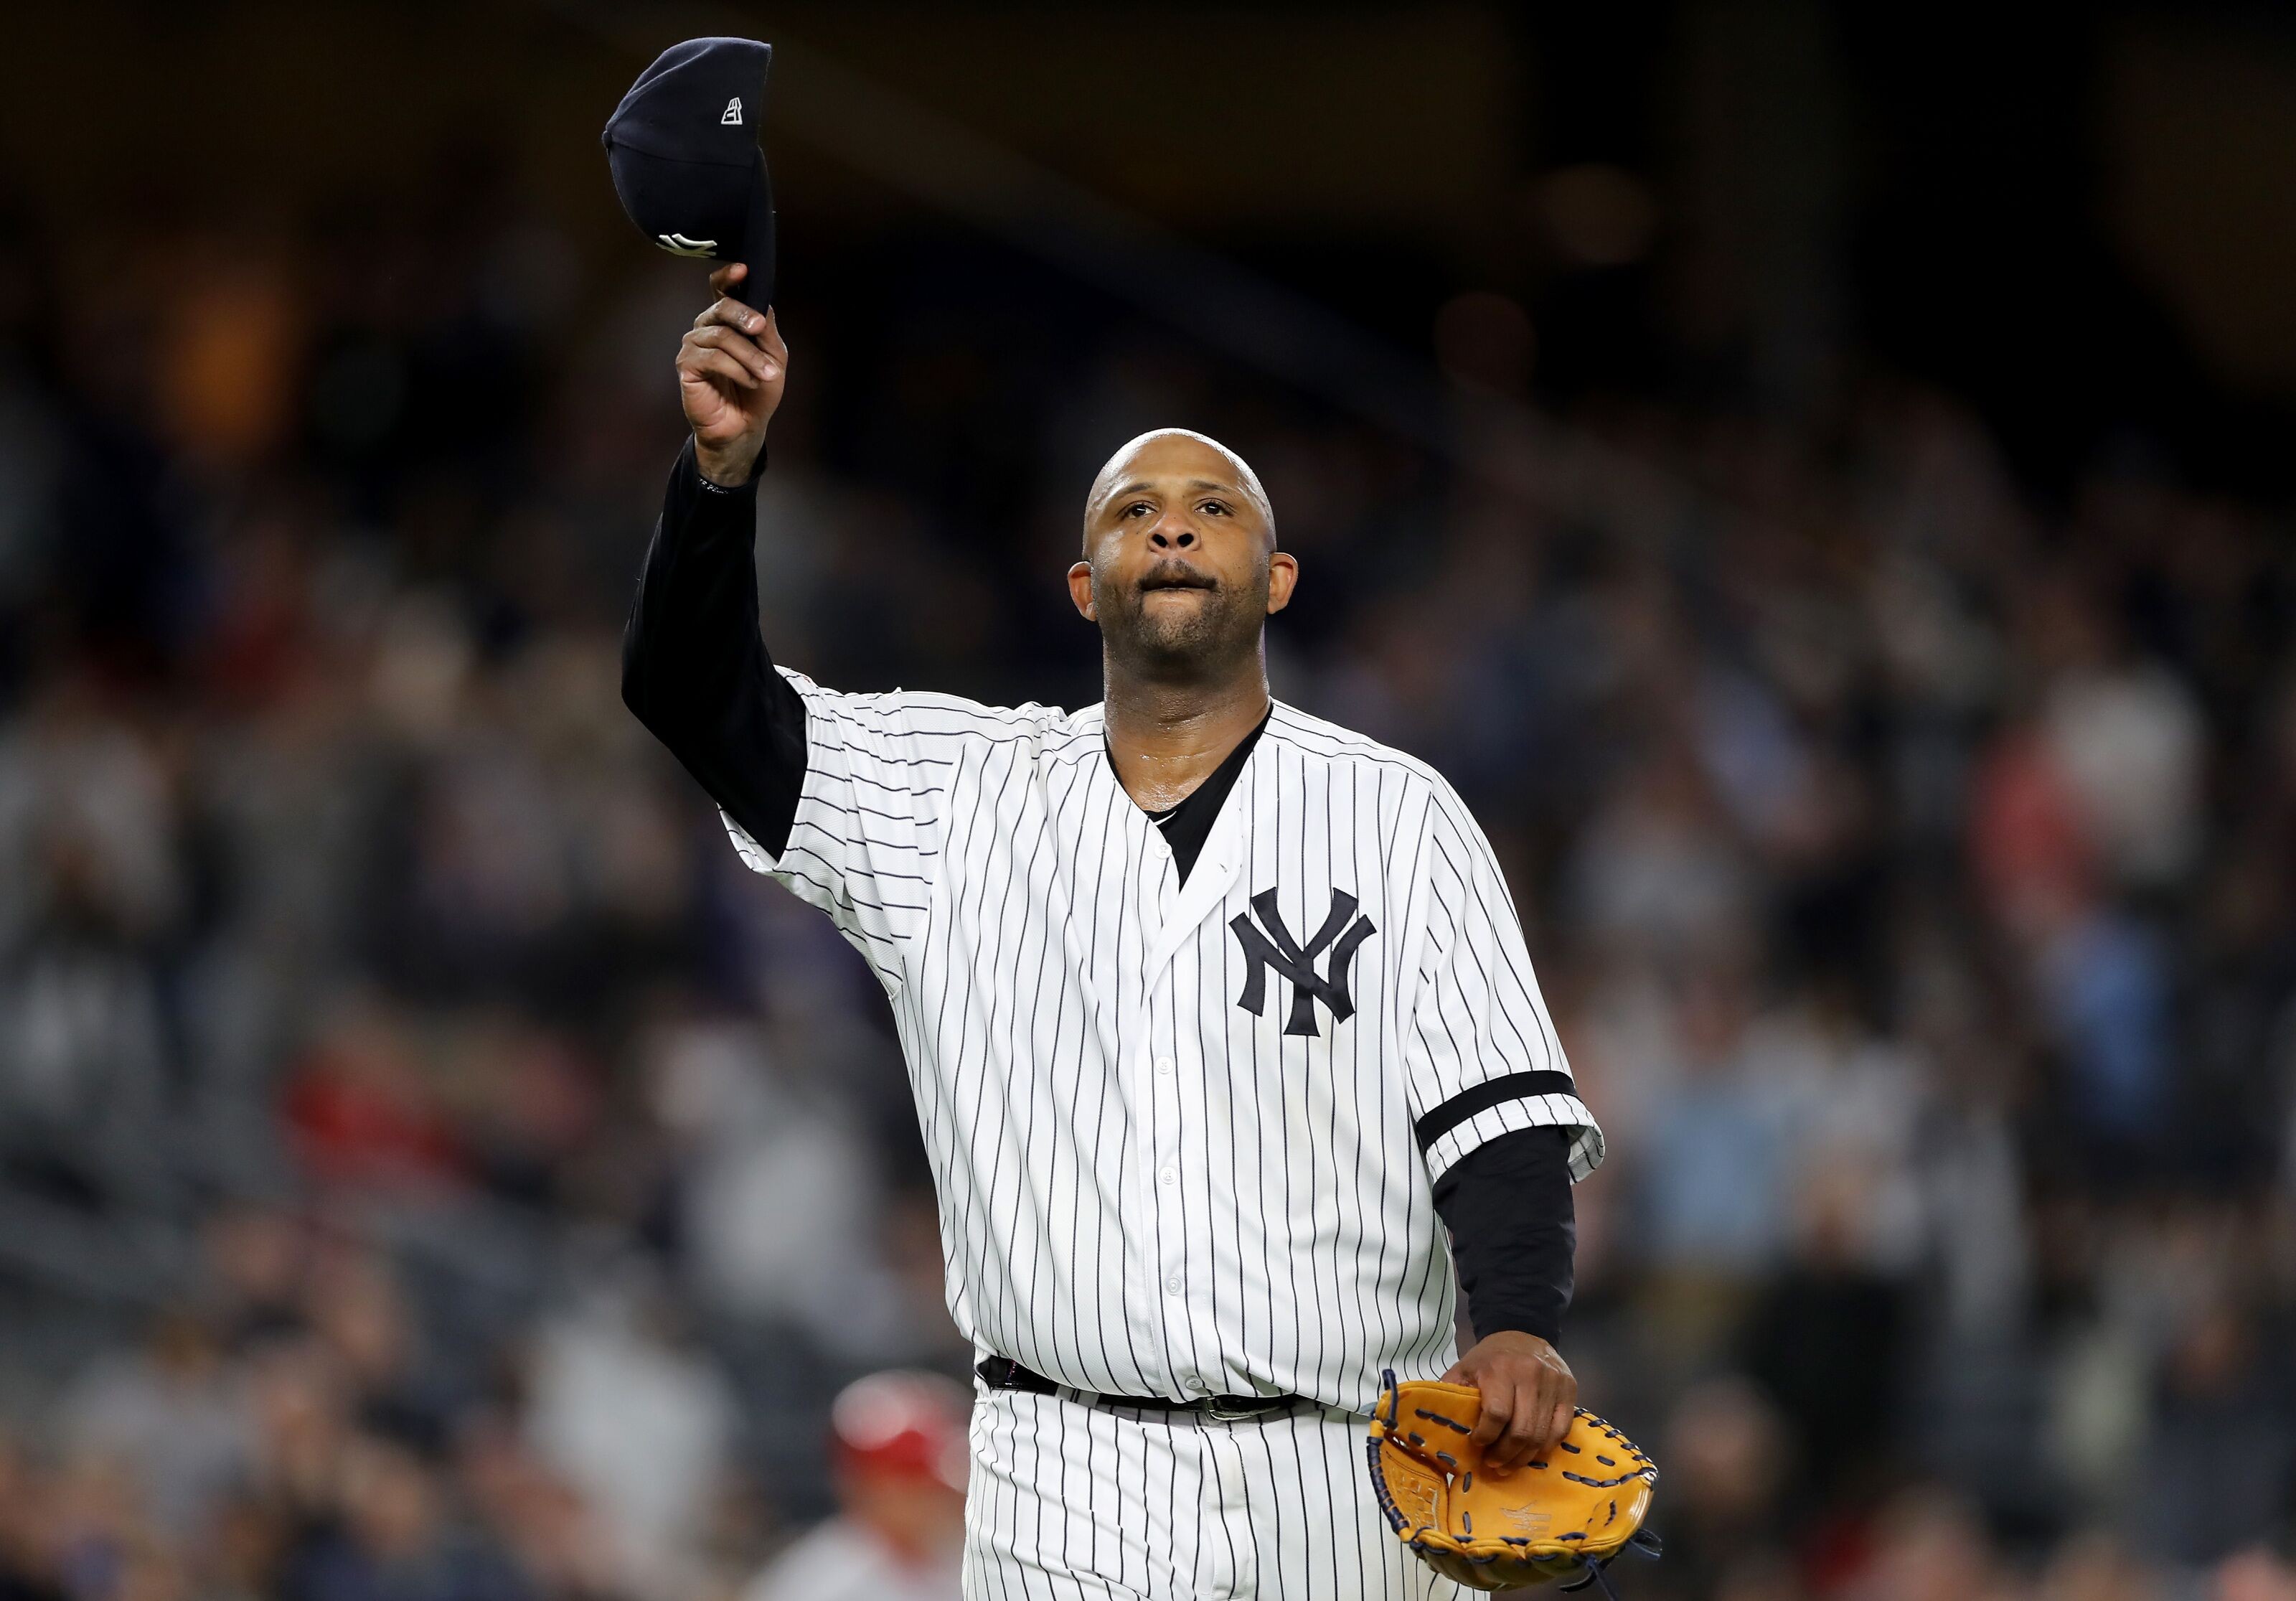 Yankees Who will be the next former Yankee inducted into the Hall of Fame?